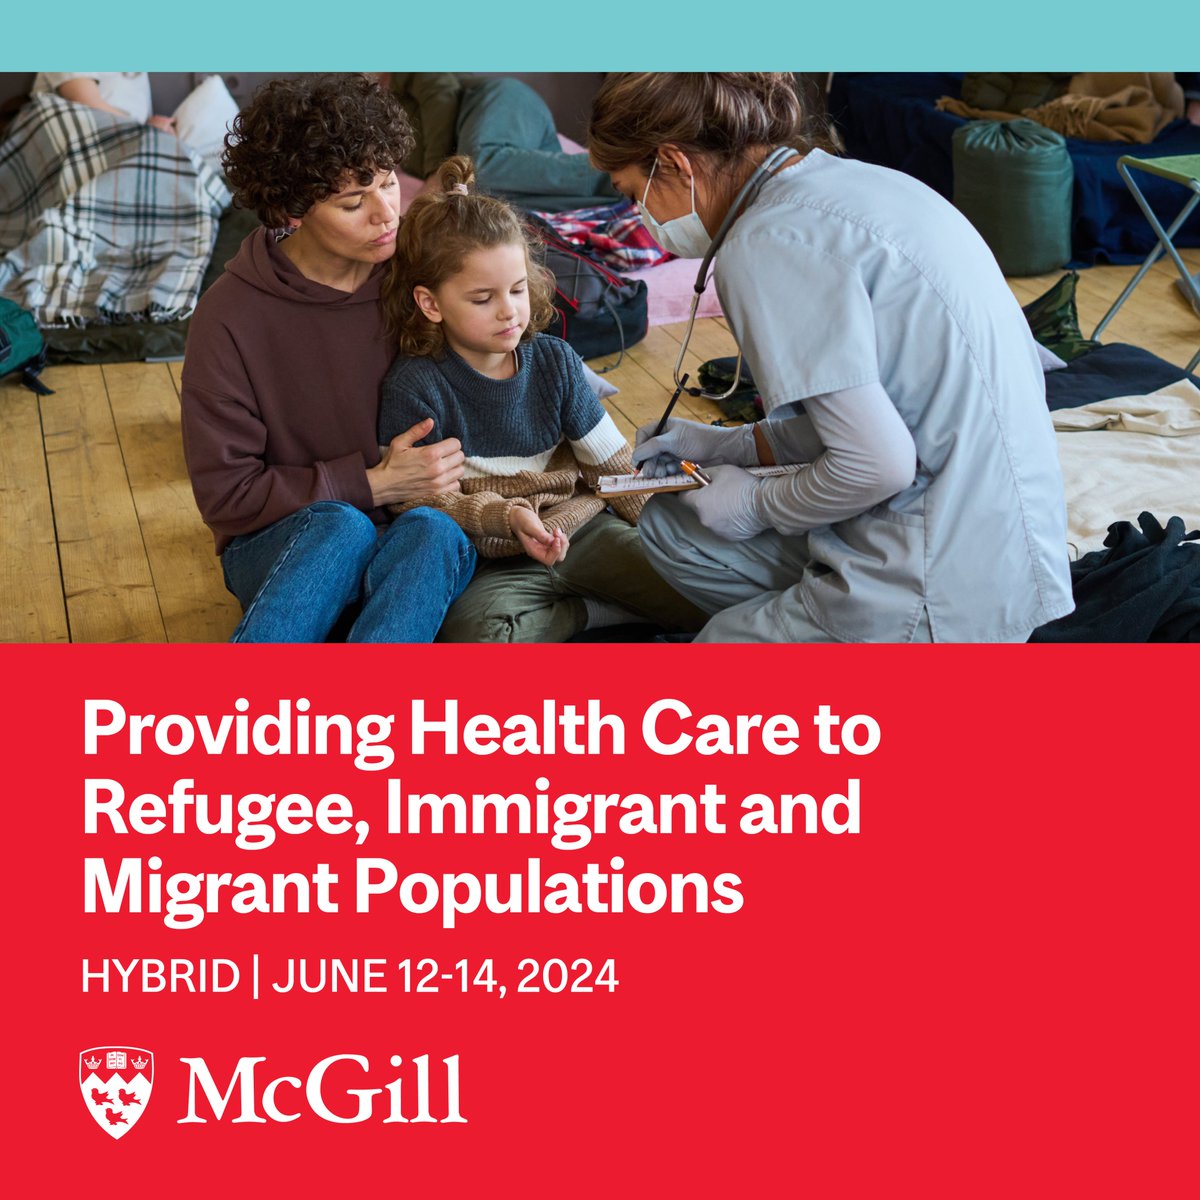 #DYK? Our accredited course 'Providing Health Care to Refugee, Immigrant & Migrant Populations' has an entire day of infectious diseases updates for clinicians. Join us online or in person at @McGillU June 12-14. #RefugeeHealth. #MigrantHealth. #ImmigrantHealth #Healthcareaccess